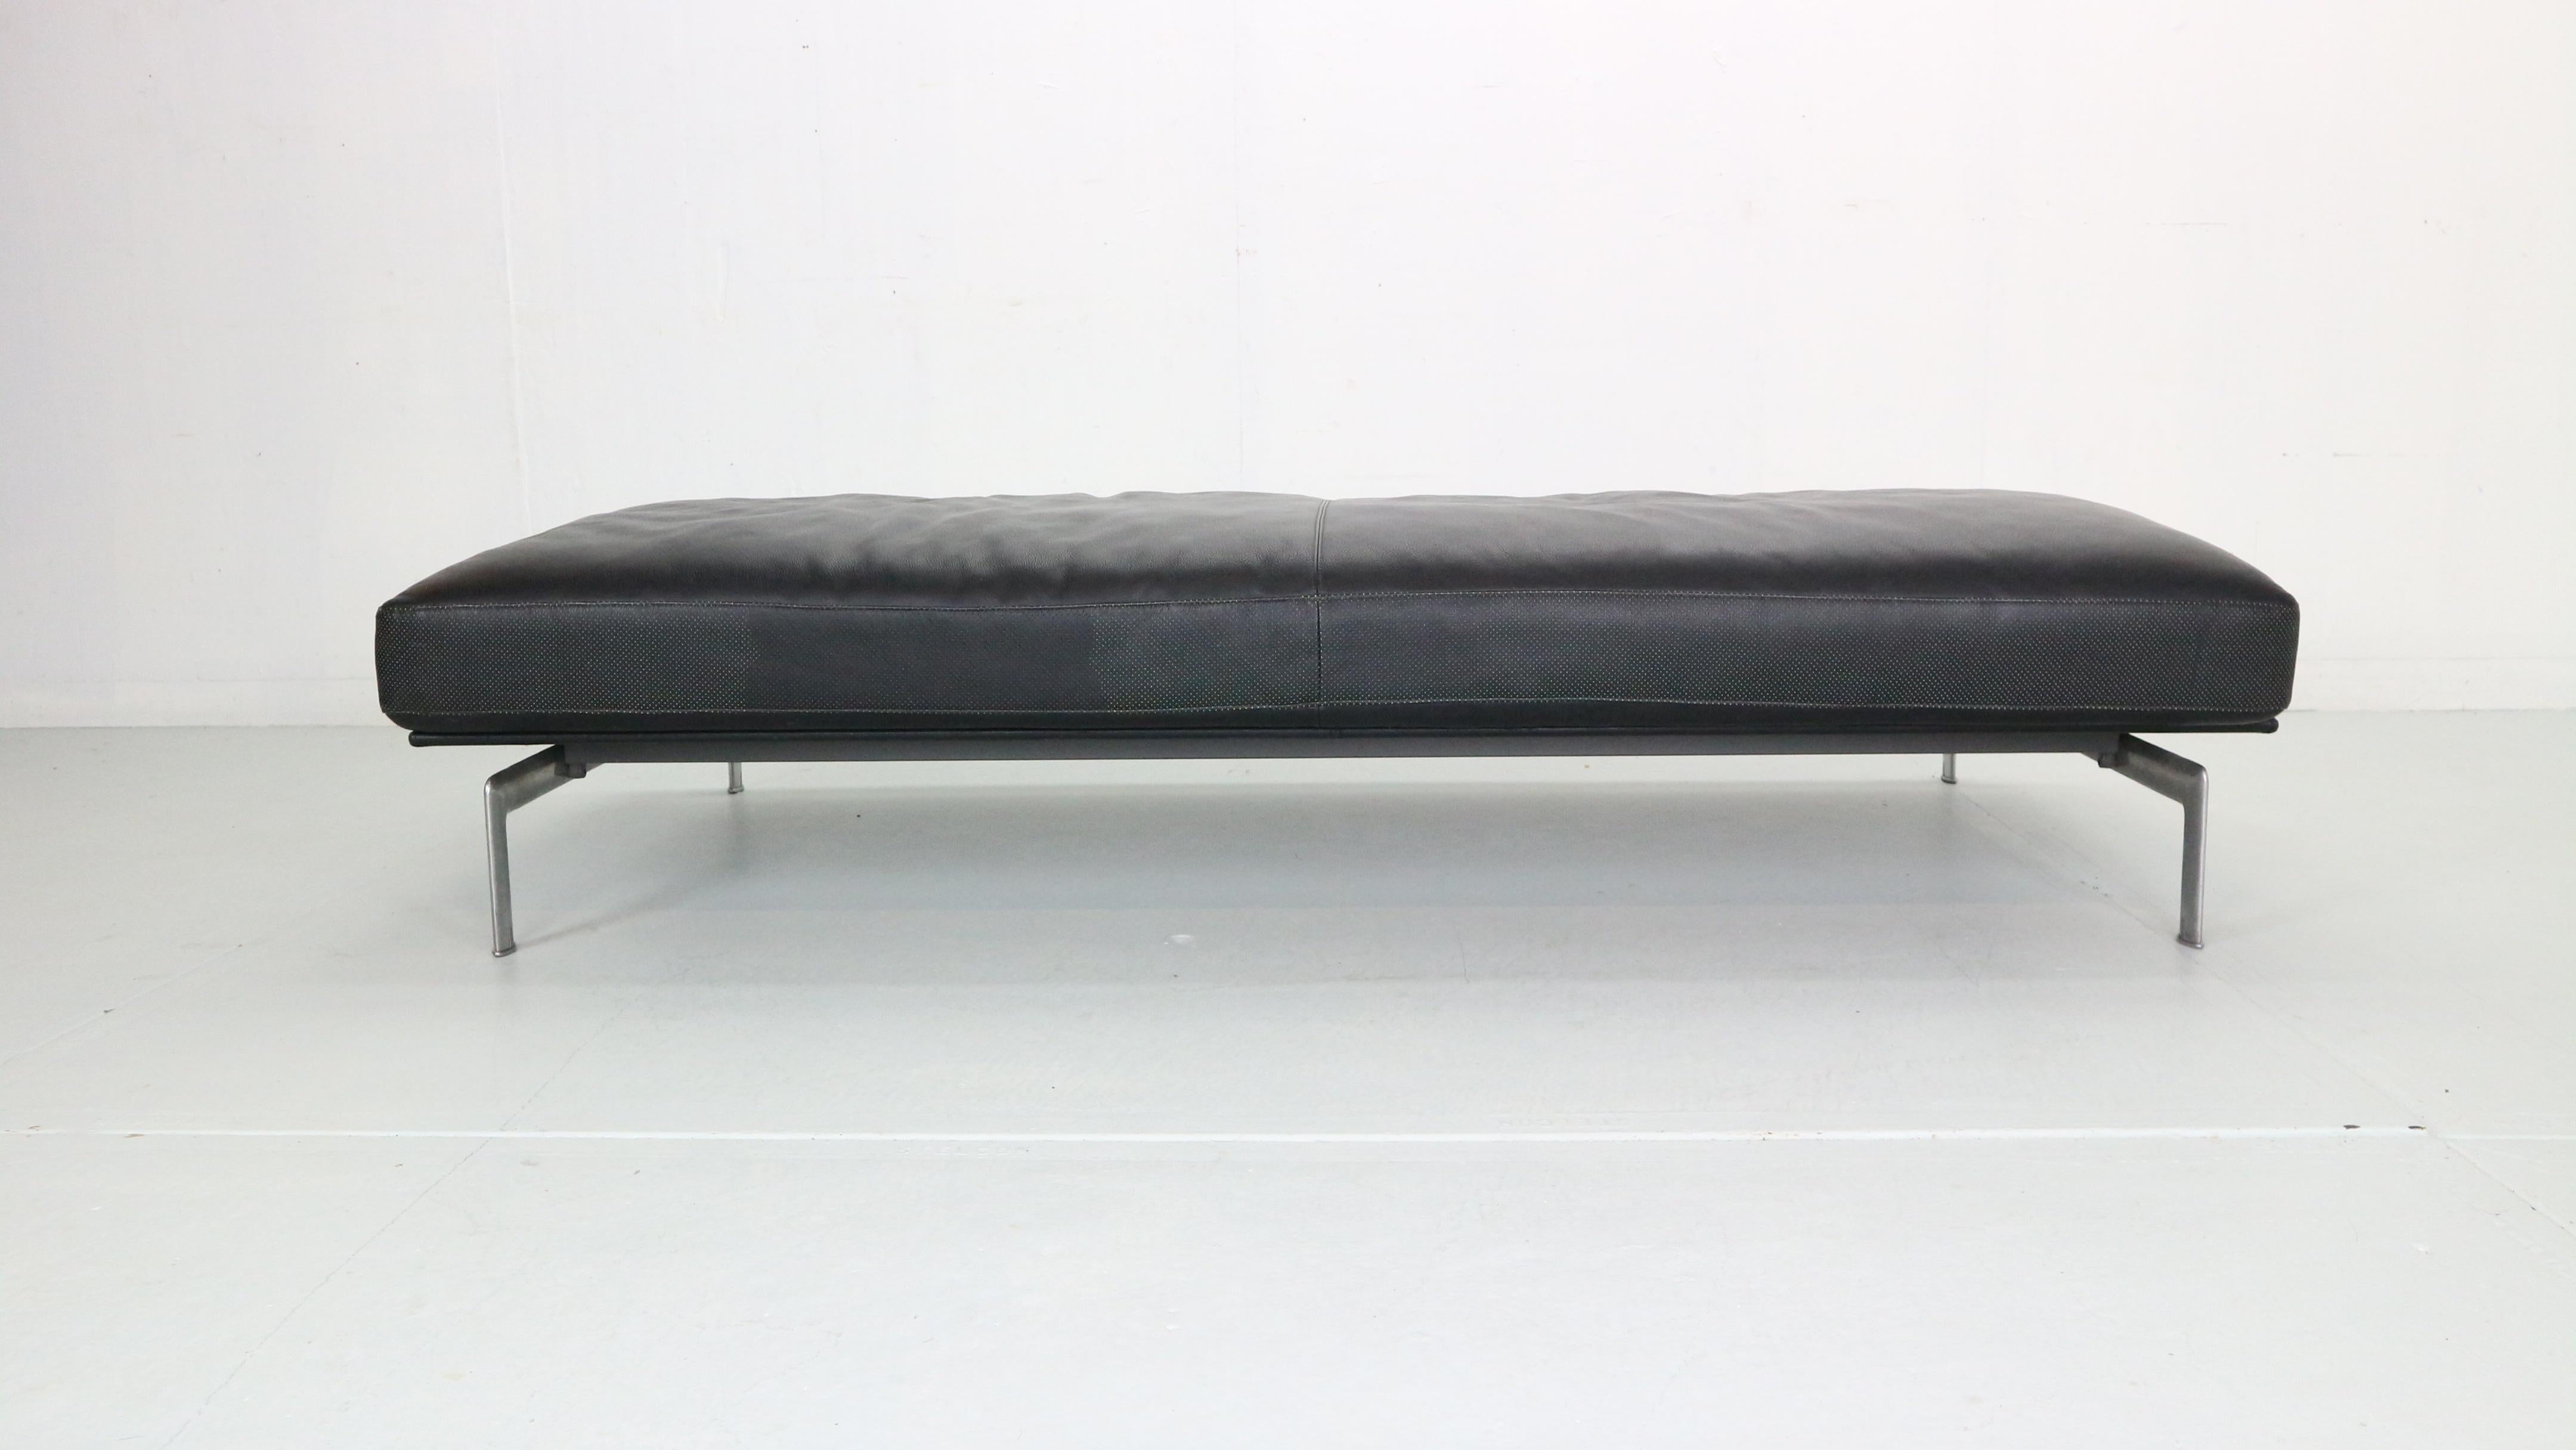 Daybed created in 1980 by Antonio Citterio Paolo Neva for B&B ITALIA manufacture.
Black leather resting on brushed steel frame.
The leather patina is in a good condition without cracks, scratches or colour differences.
An elegant and